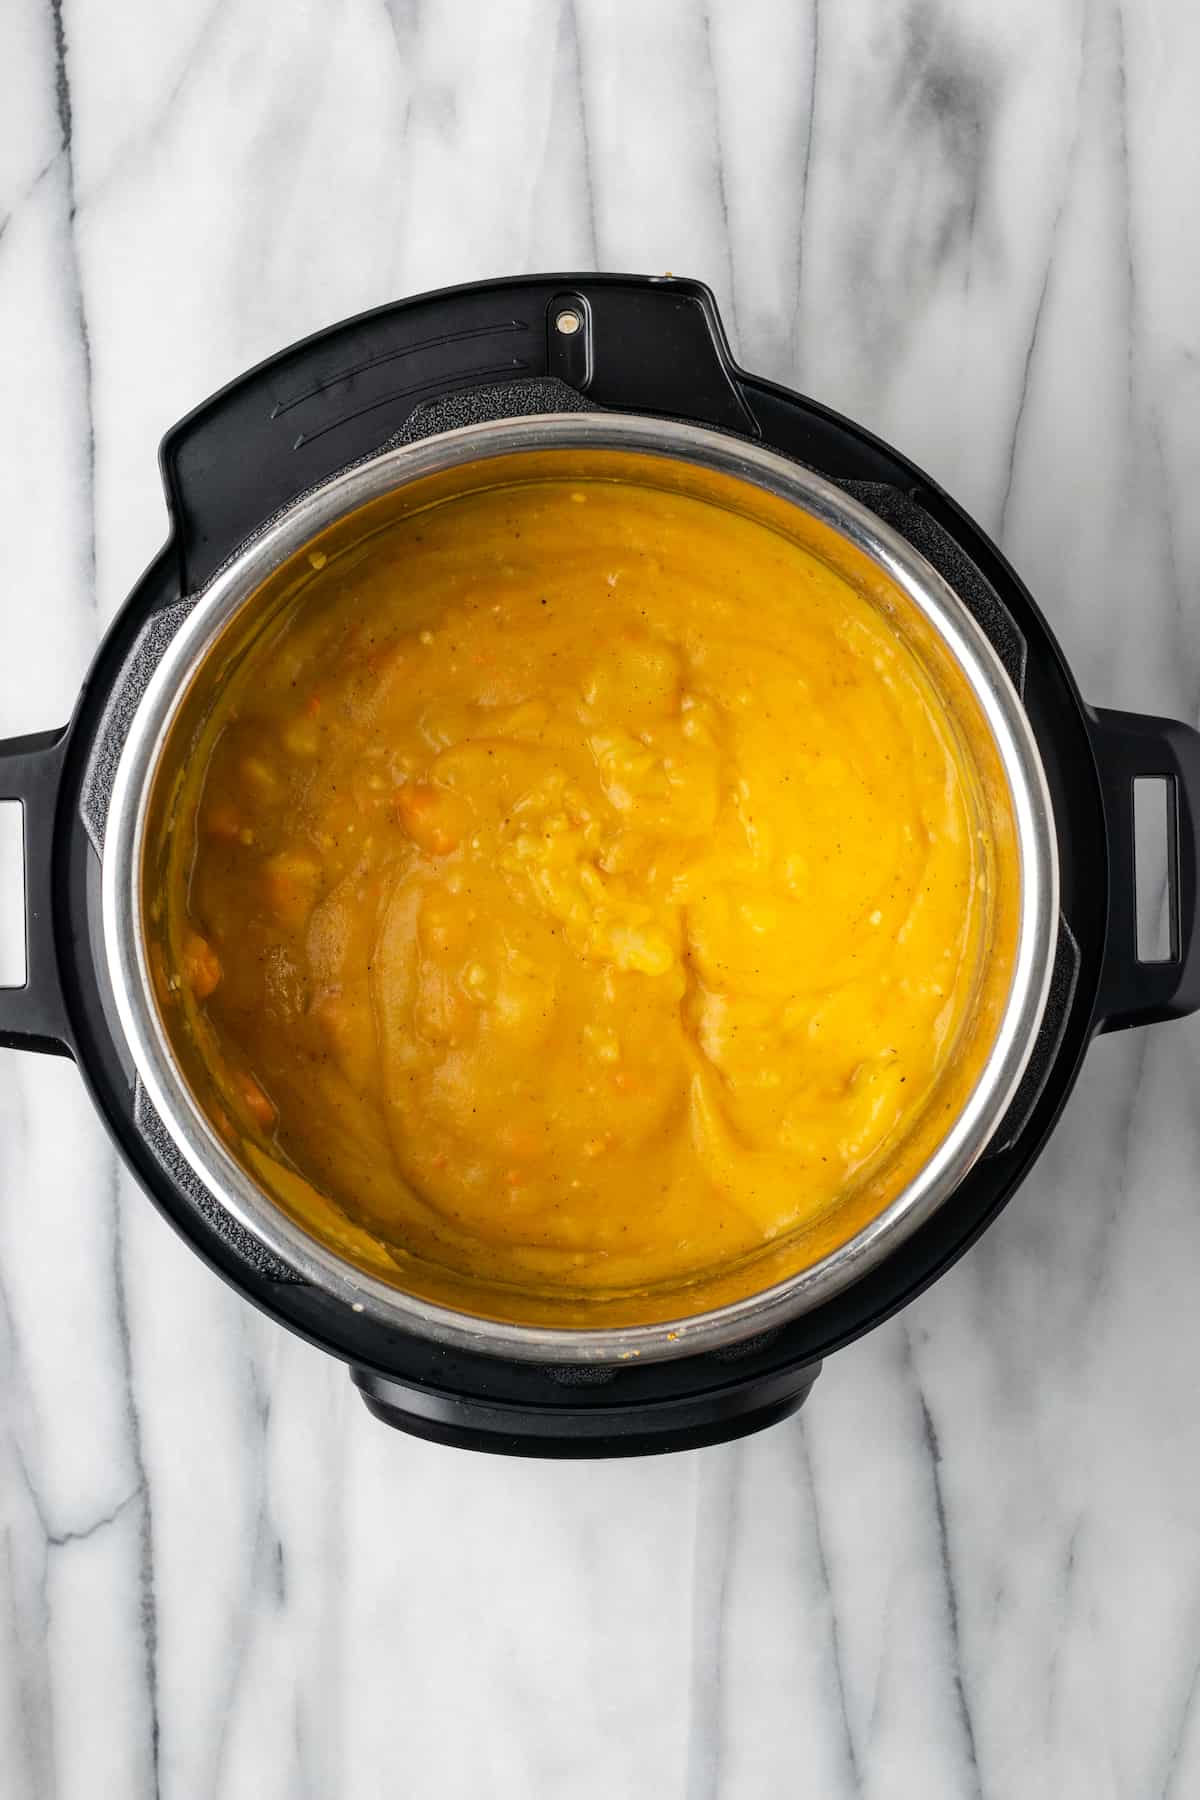 Blended potatoes with carrots and other veggies in an Instant Pot